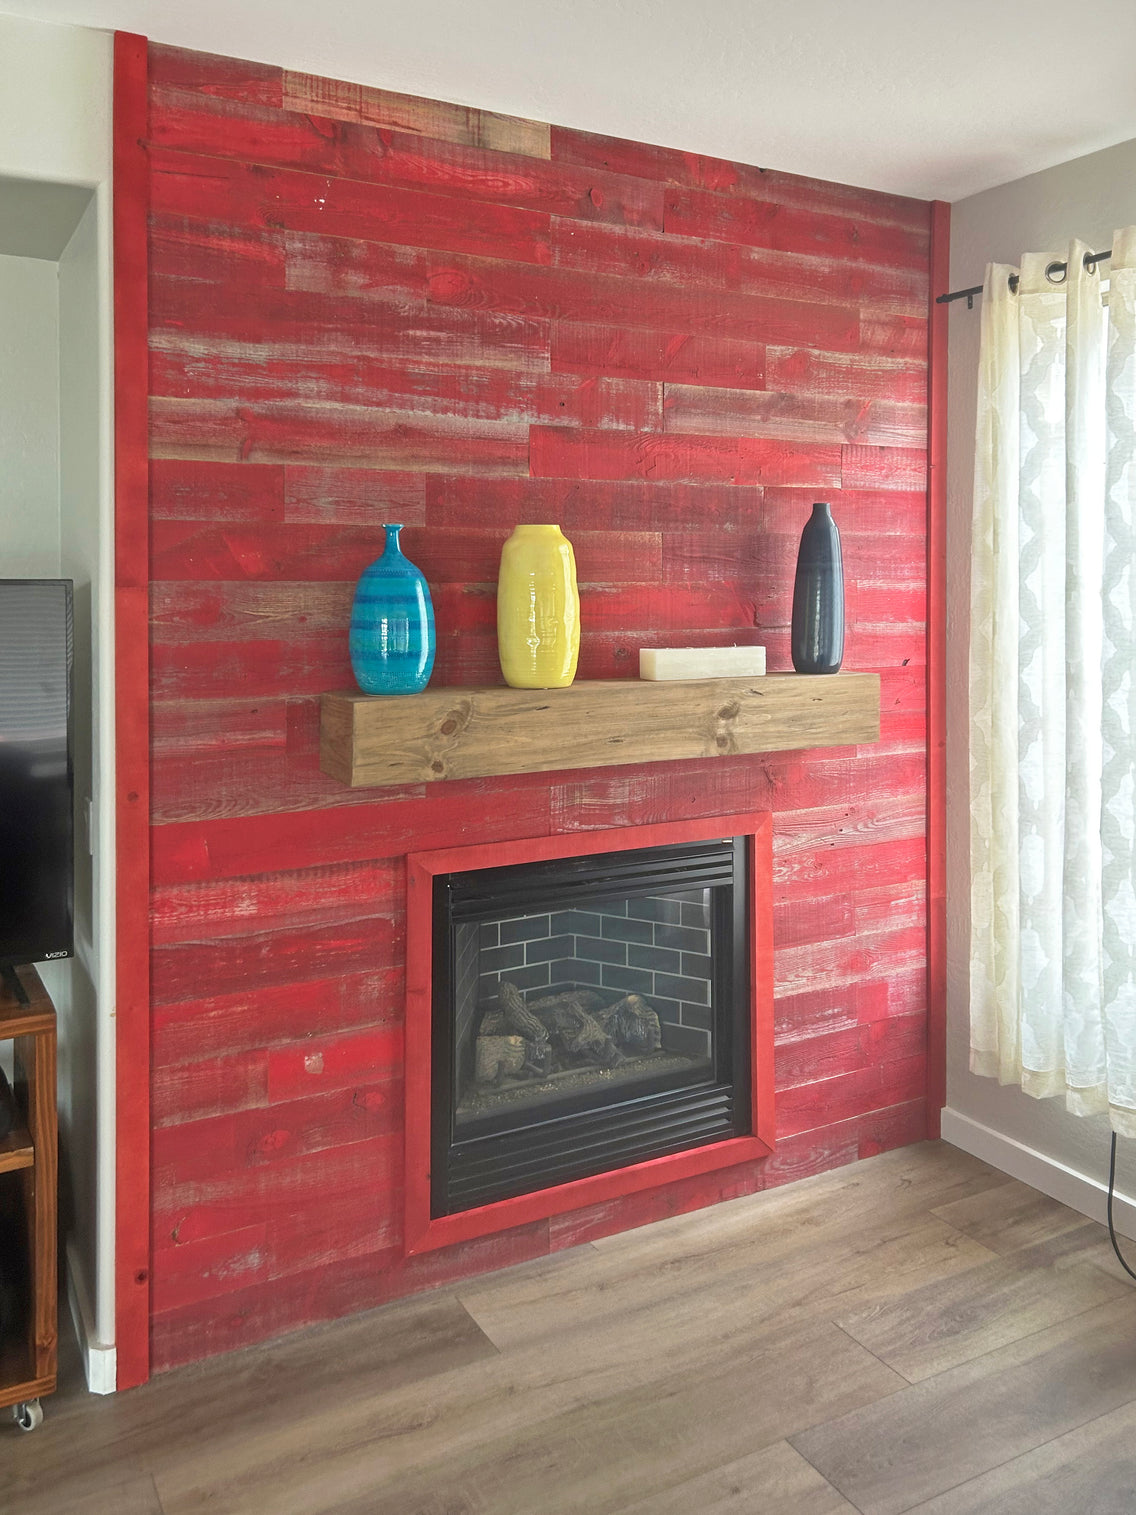 Painted red barn wood fireplace surround with 3 colorful vases on a mantel.